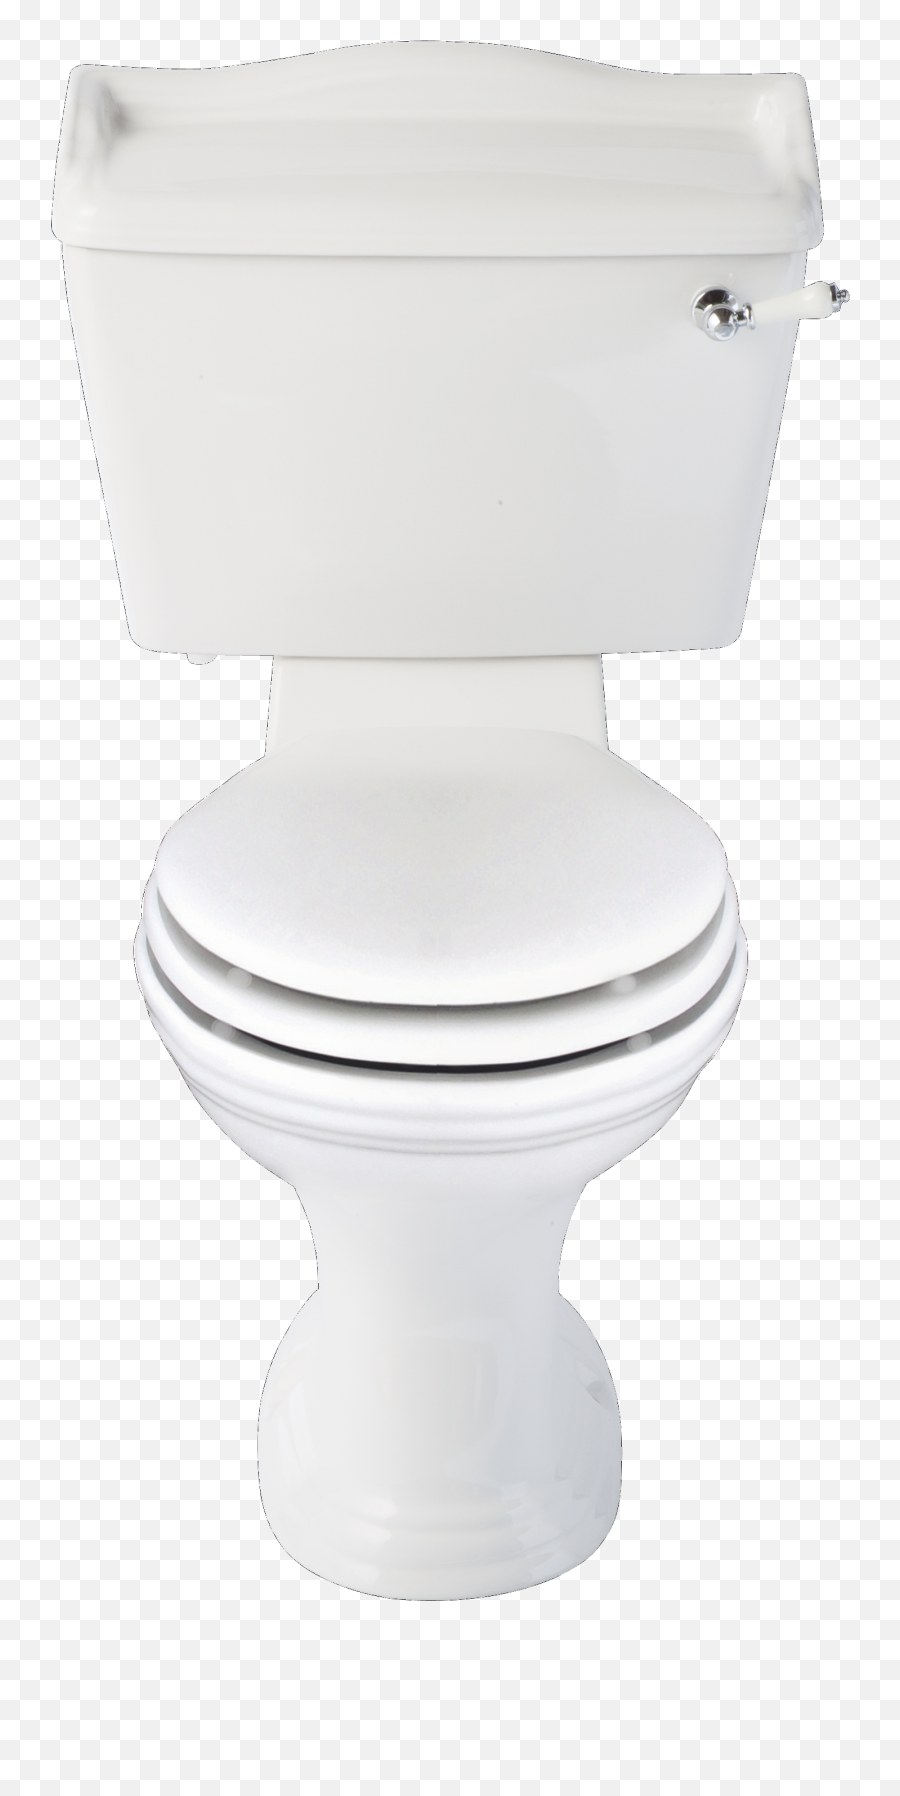 Toilet Png Image Toilet Png Images Image - Portable Network Graphics Emoji,Toilet Png